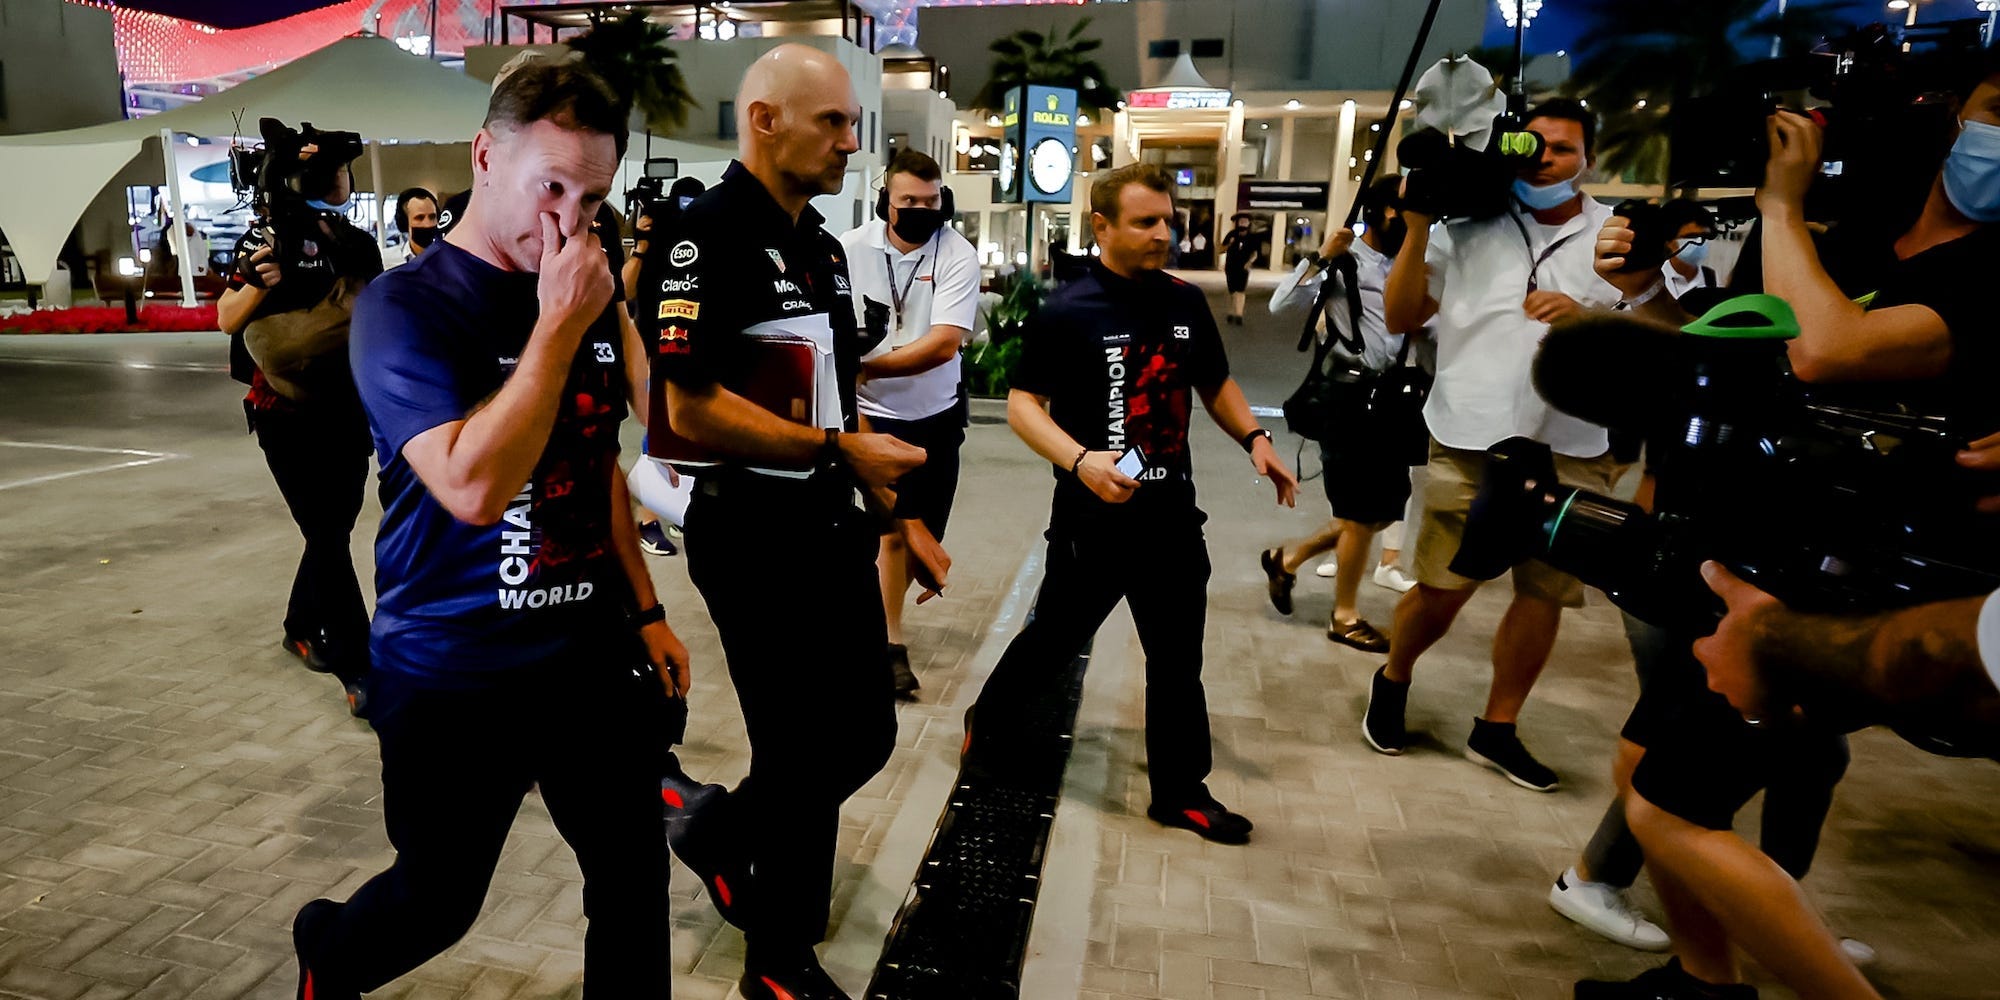 Christian Horner and Adrian Newey head to the stewards' office after the Abu Dhabi Grand Prix.